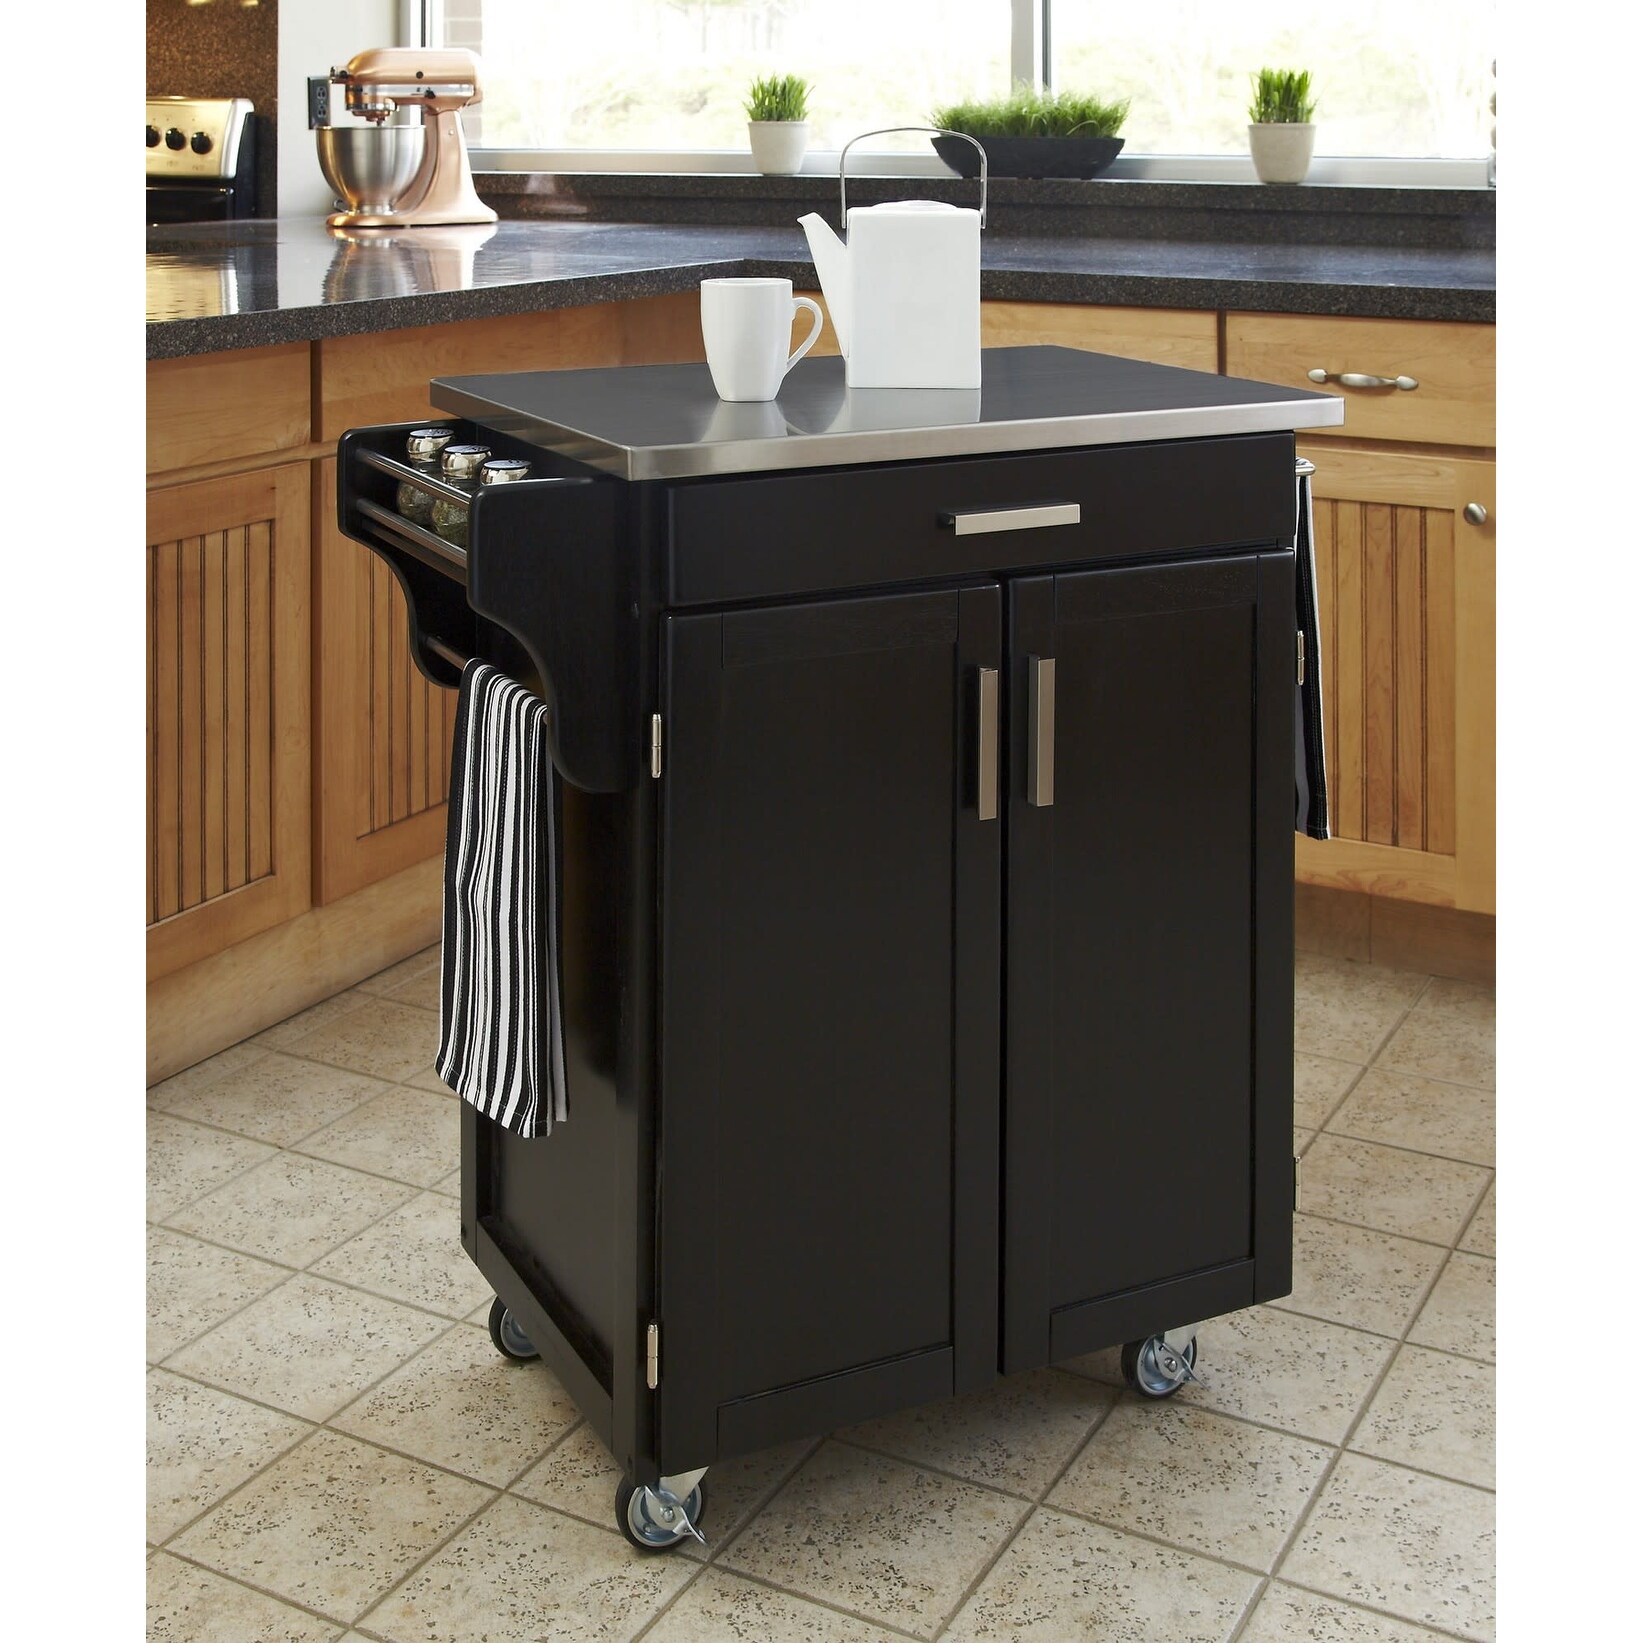 Cuisine Cart Black Kitchen Cart with Stainless Steel Top - 33' x 19' x 36'